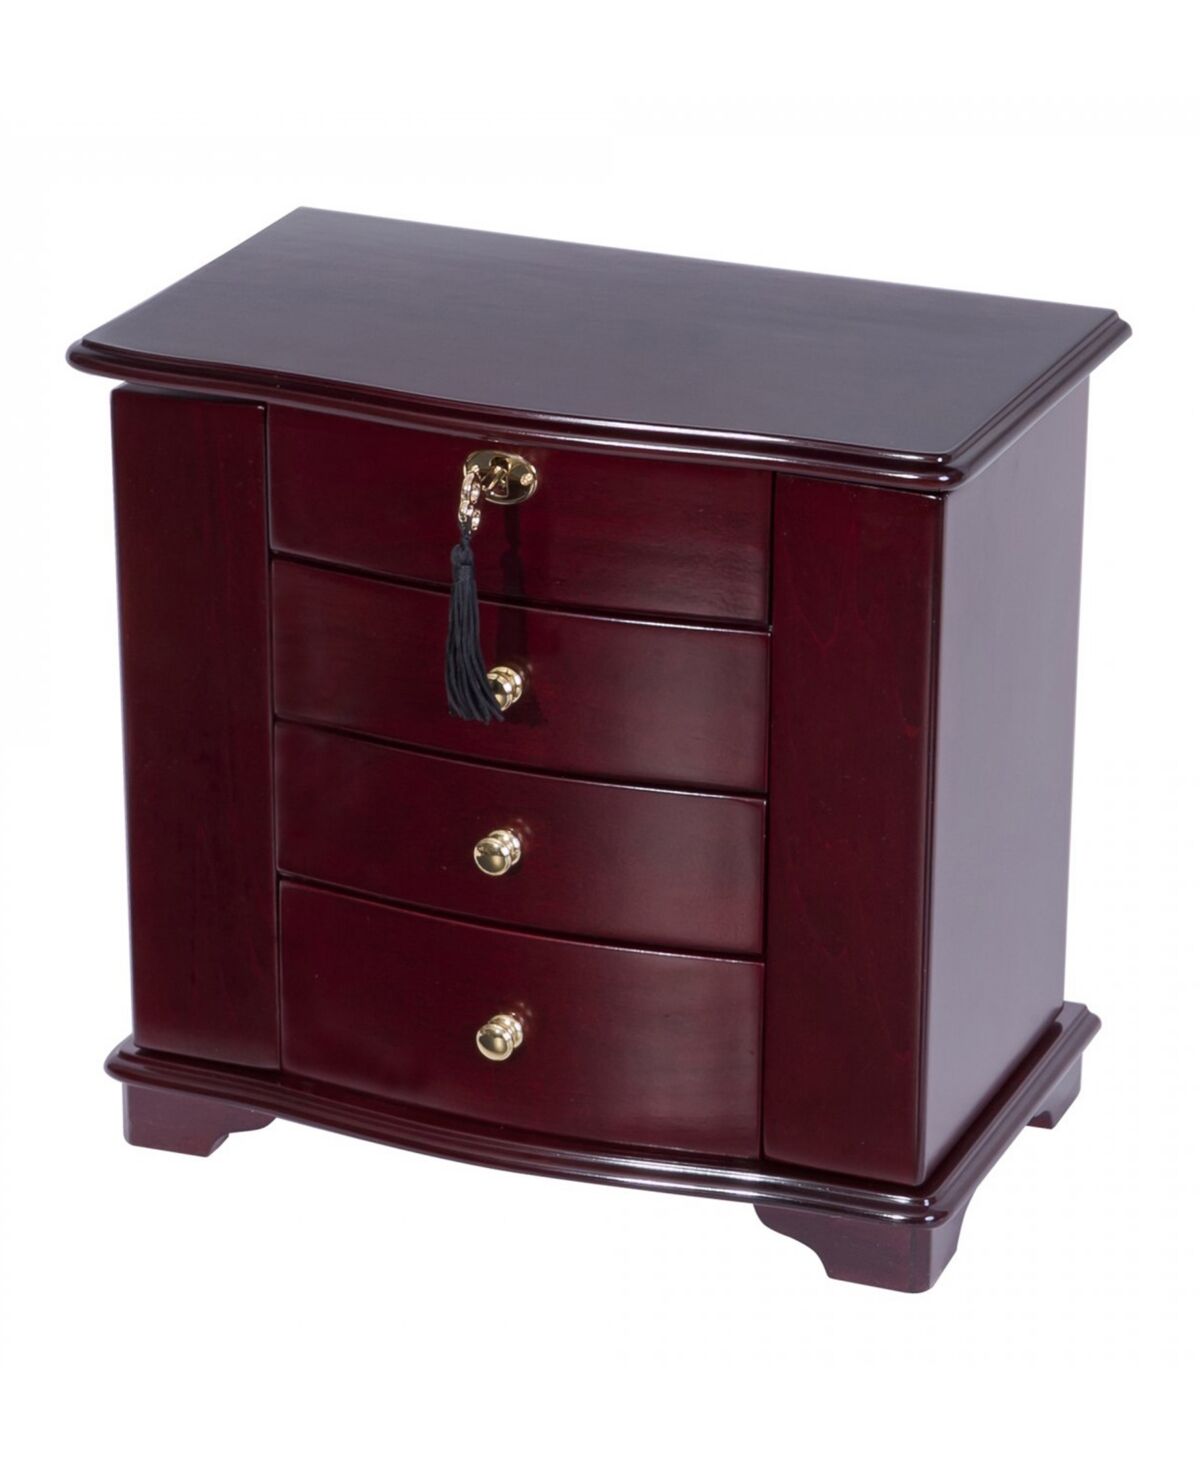 Mele & Co Waverly Wooden Jewelry Box in Finish - Cherry